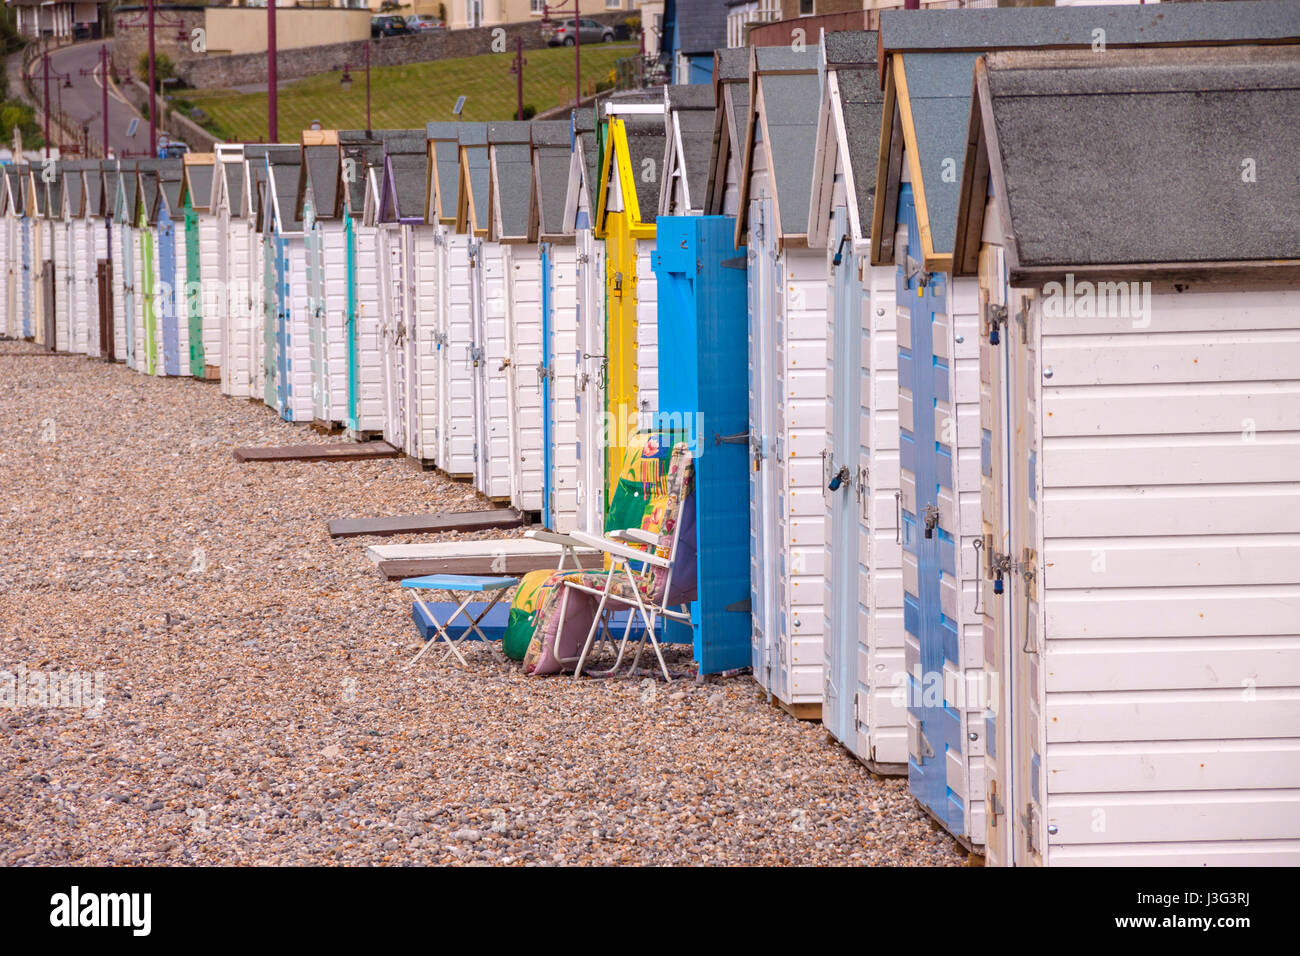 Beach huts on the beach at Seaton Devon, with blocks of flats behind. Stock Photo